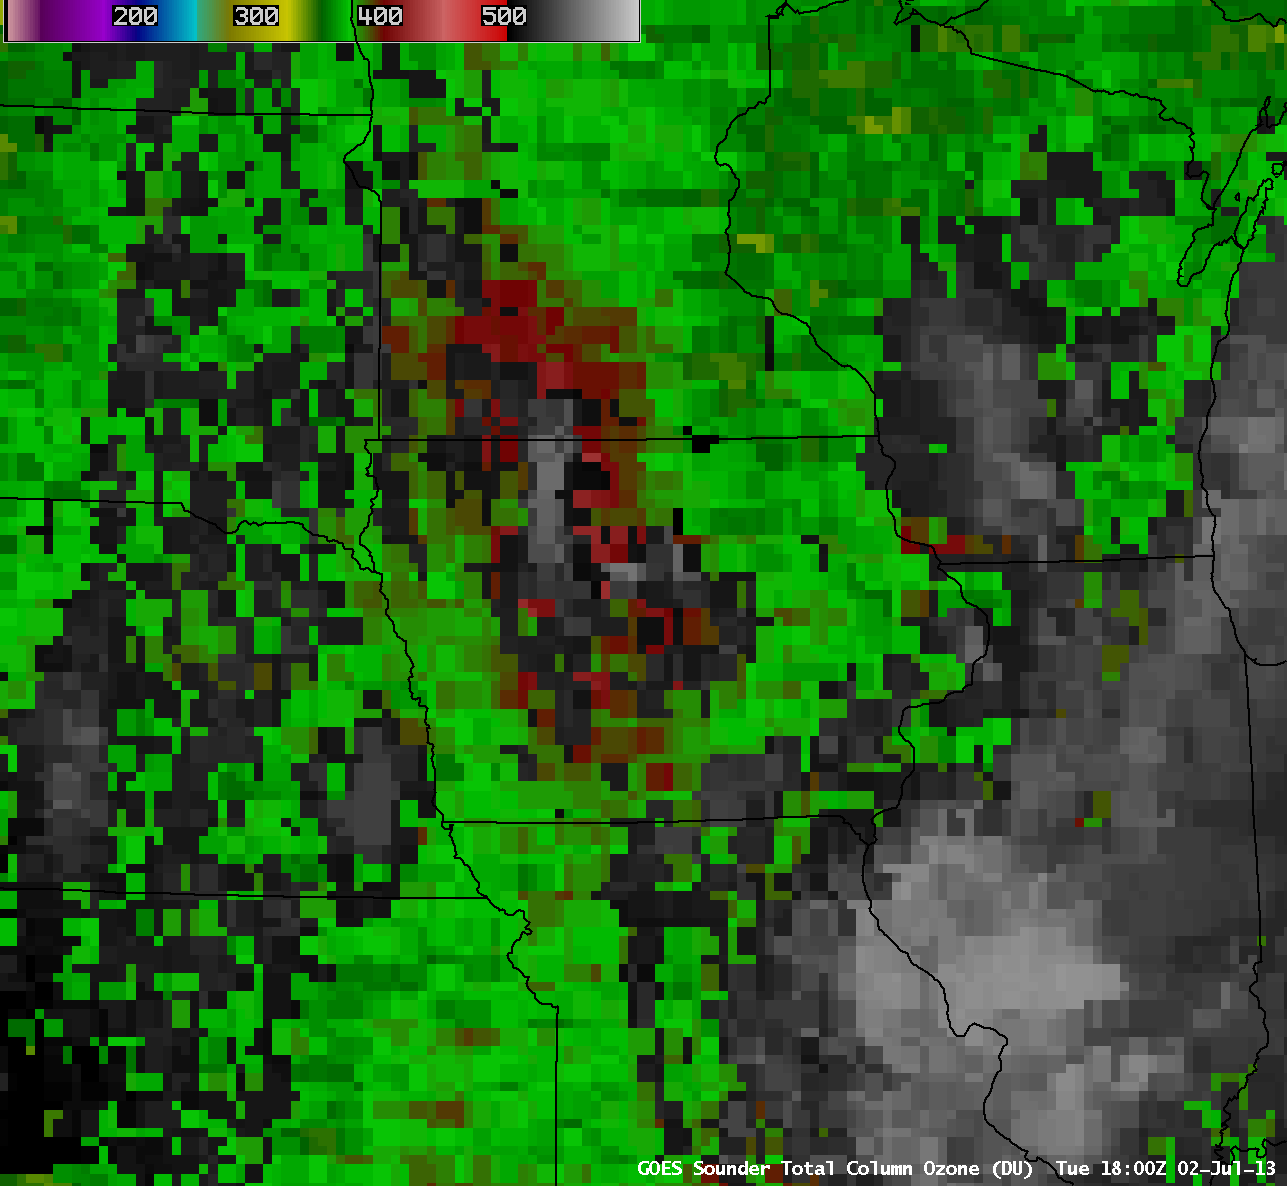 GOES-13 sounder Total Column Ozone product